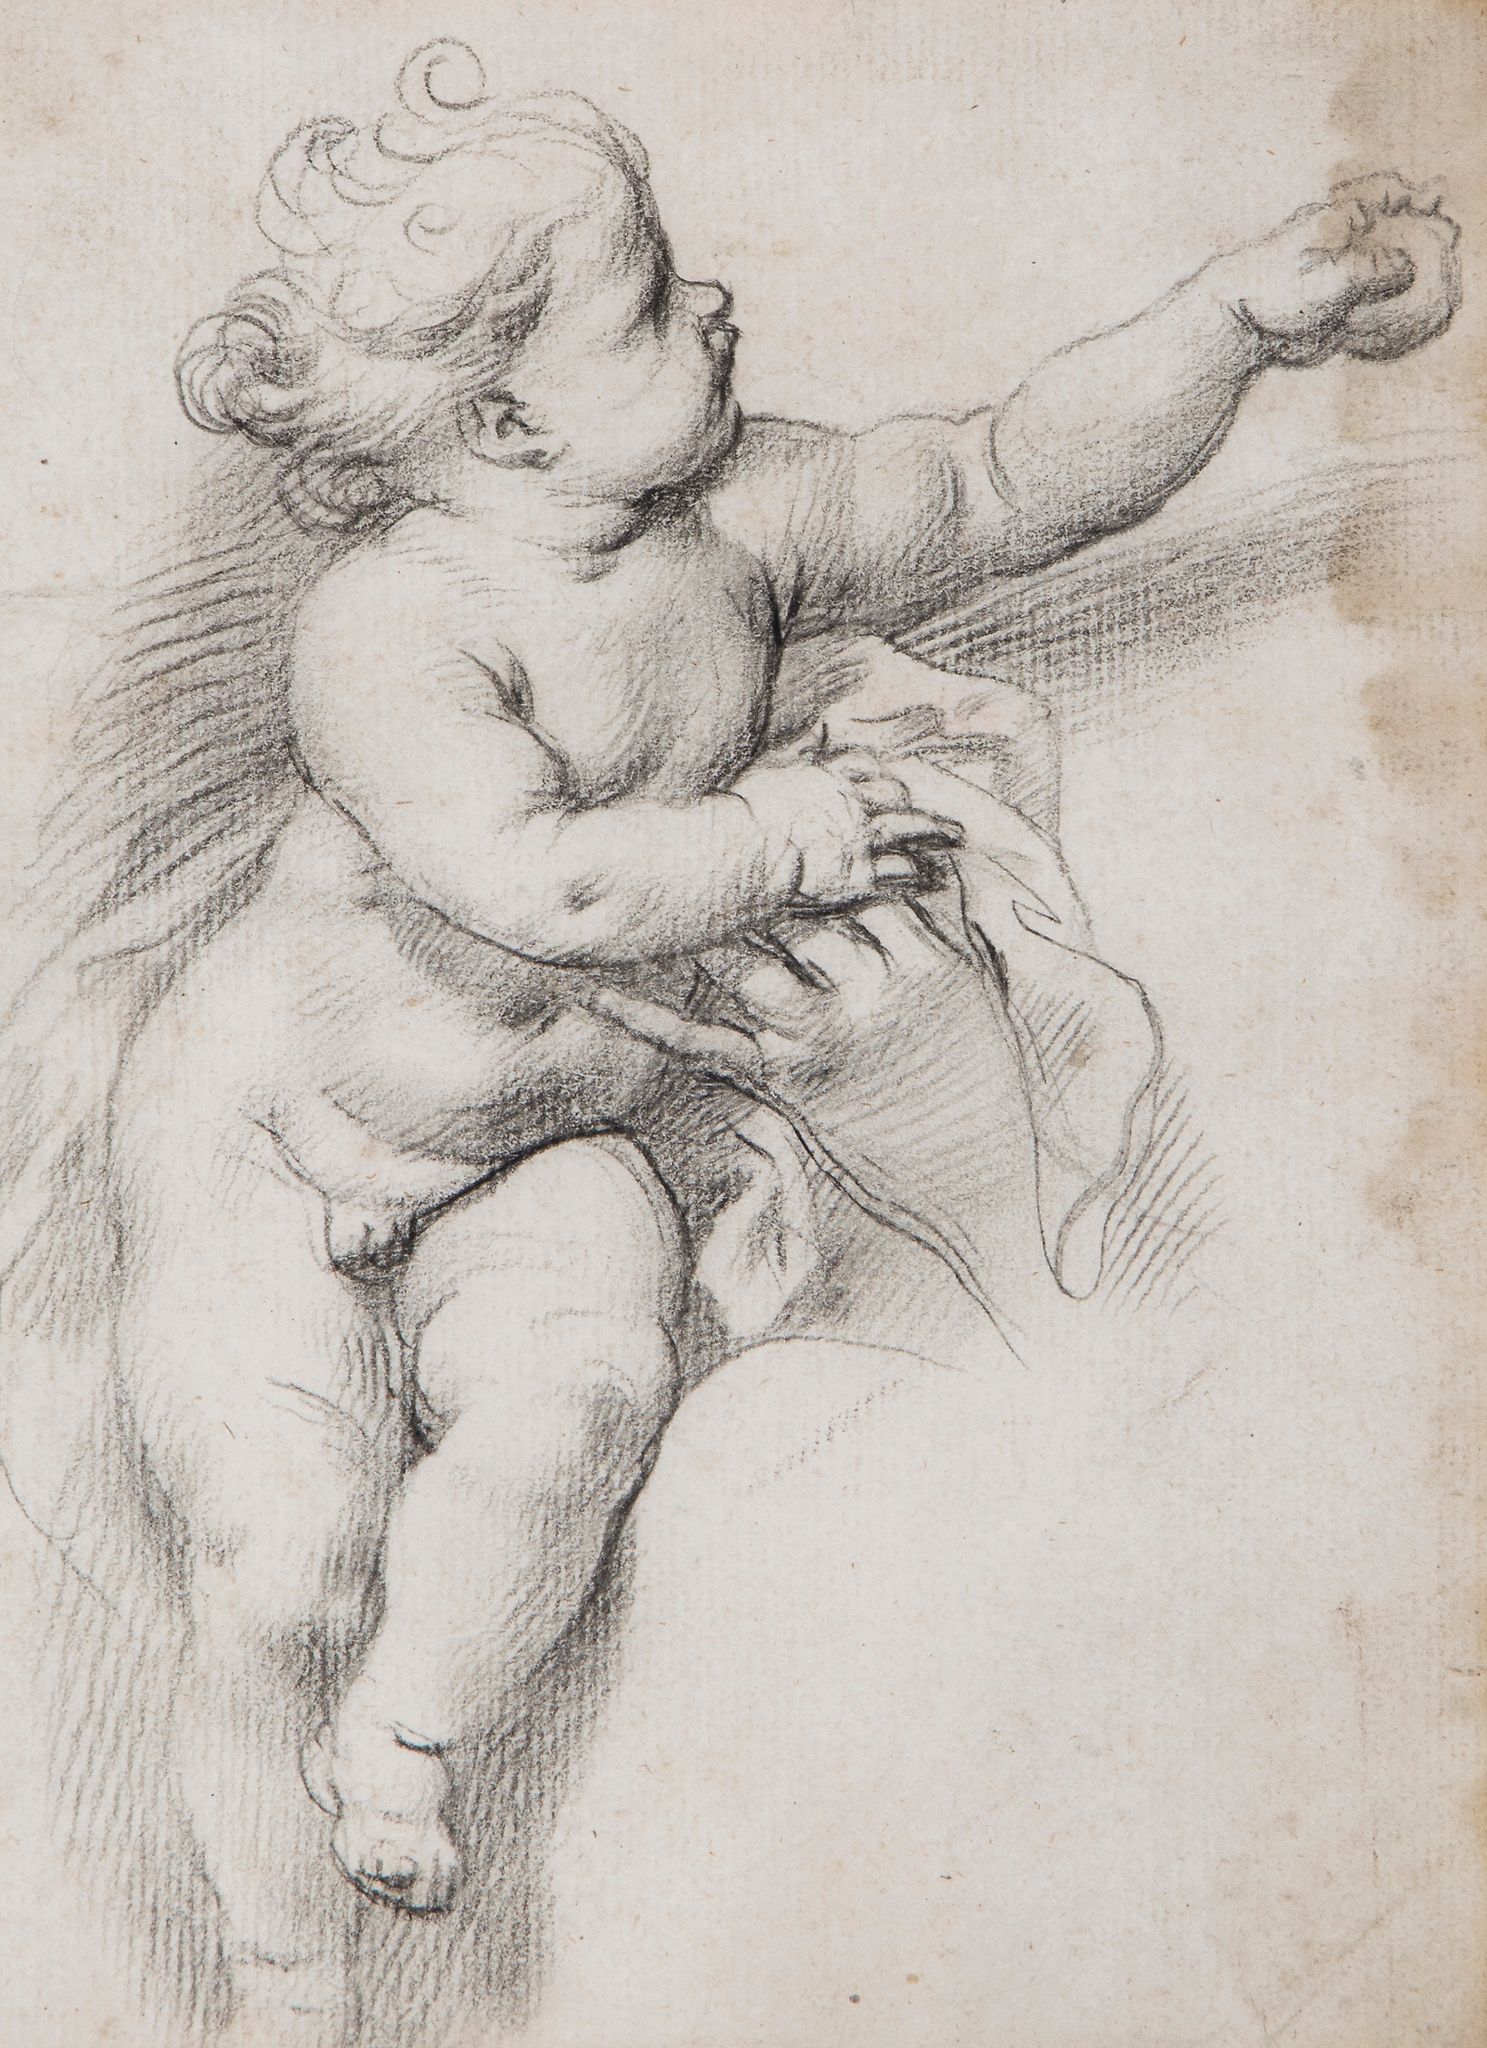 Circle of Carlo Maratta (1625-1713) - Study of Christ Child, with left arm outstretched grasping